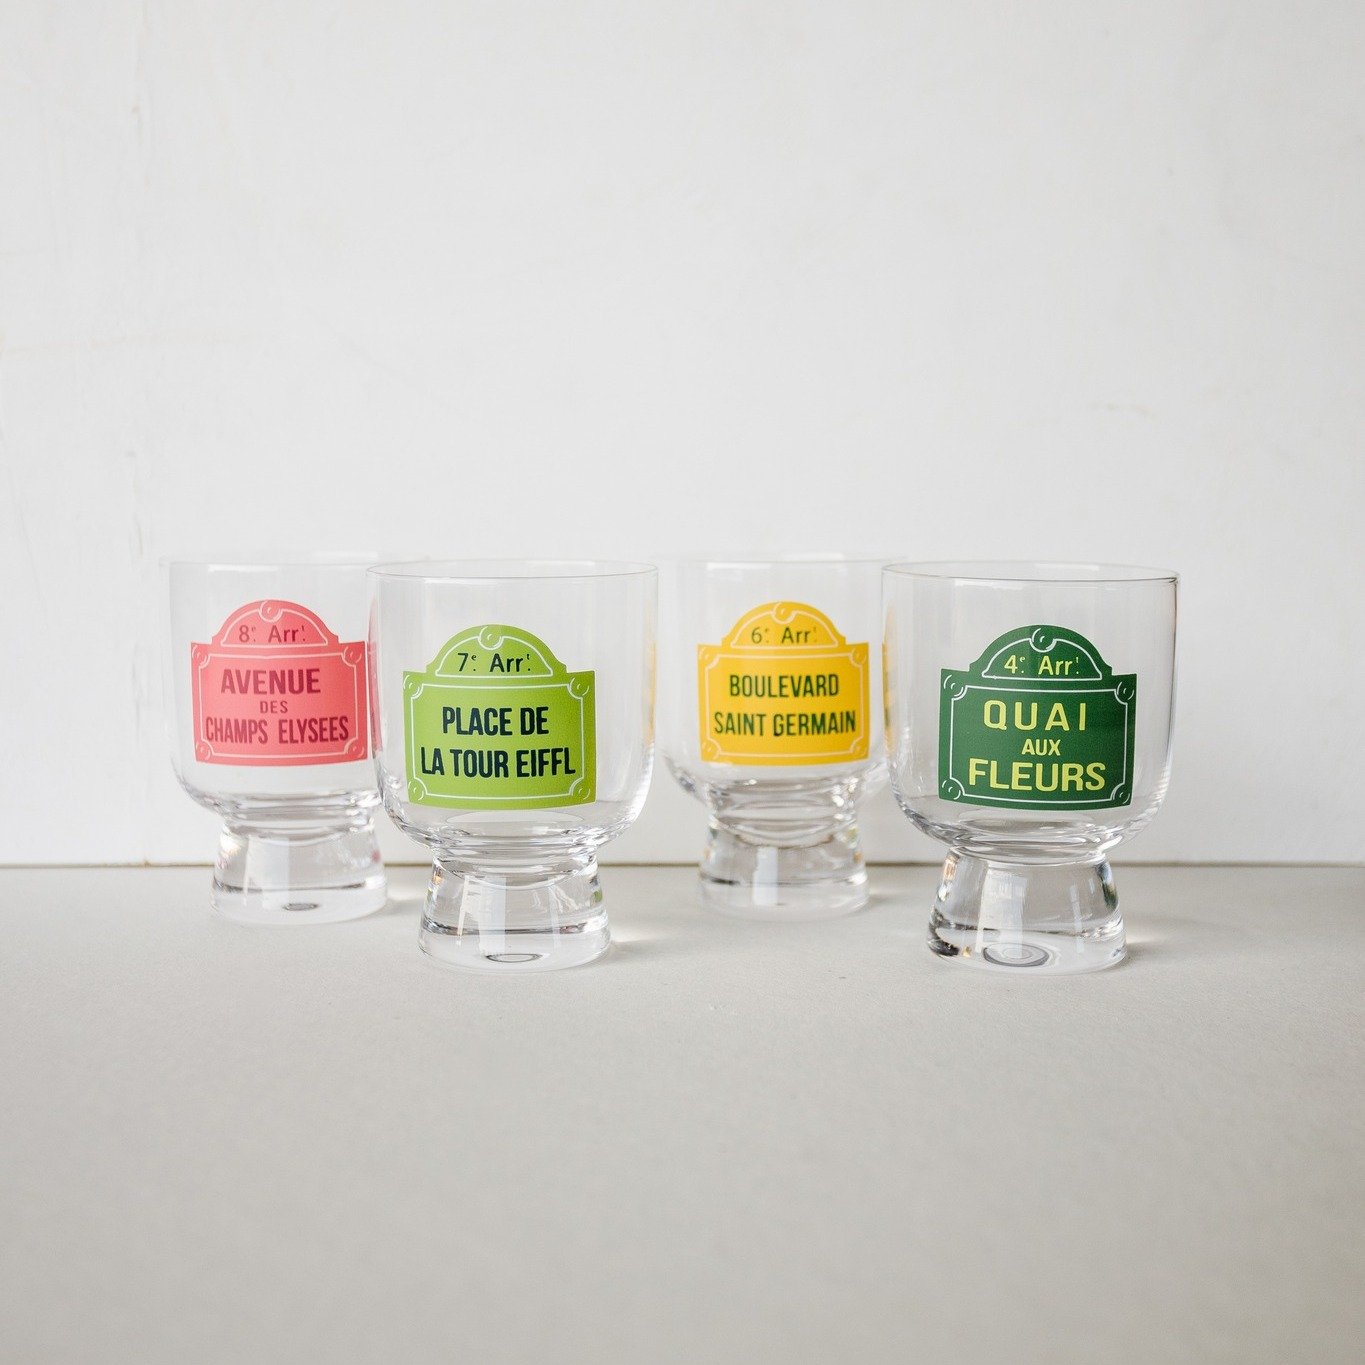 Tres Chic! Love these Parisian Drinking Glasses that were just added to the Shop!
.
.
.
.
.
Shop. Home decor. Housewares. Kitchenware. Shop small. Shop local. Support small